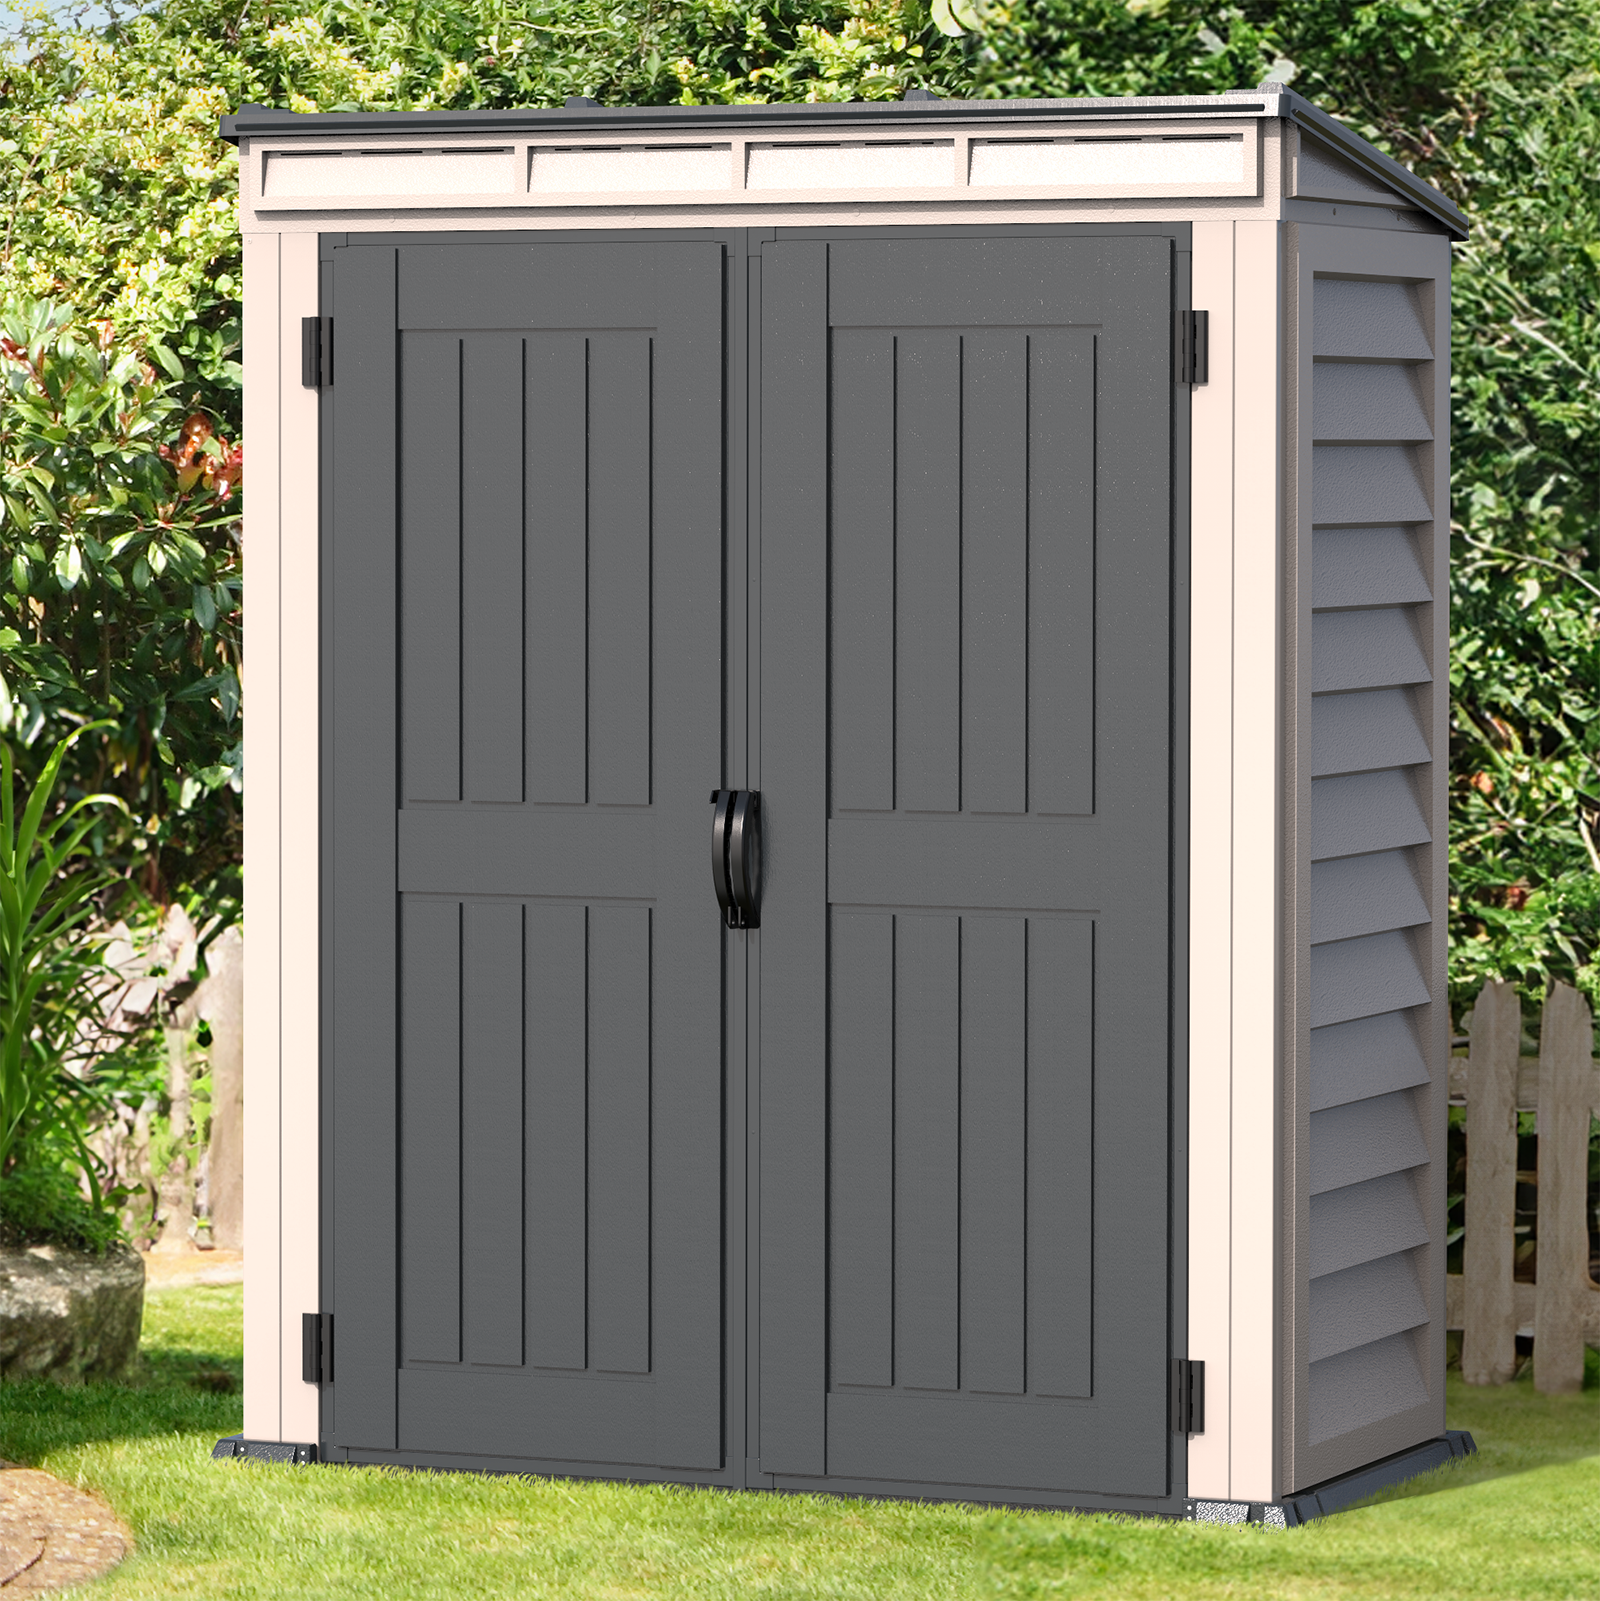 Duramax YardMate Plus Pent 5 ft. 6 in. x 3 ft. Gray Vinyl Storage Shed with Molded Floor